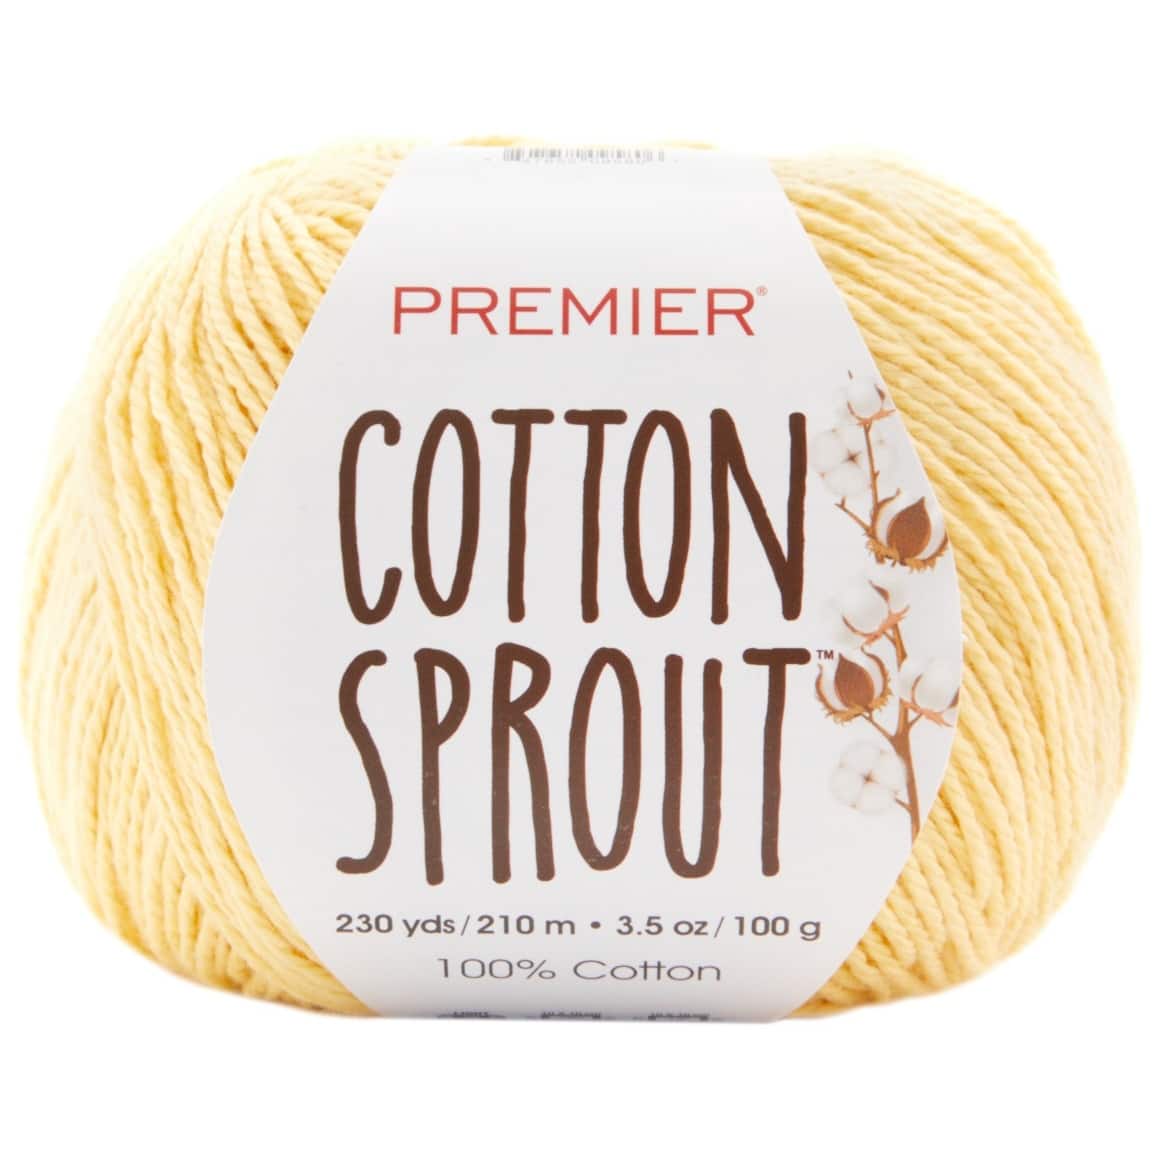 Premier Yarns Cotton Sprout DK, Natural Cotton Yarn, Machine-Washable, DK  Yarn for Crocheting and Knitting, Gloaming, 3.5 oz, 230 Yards